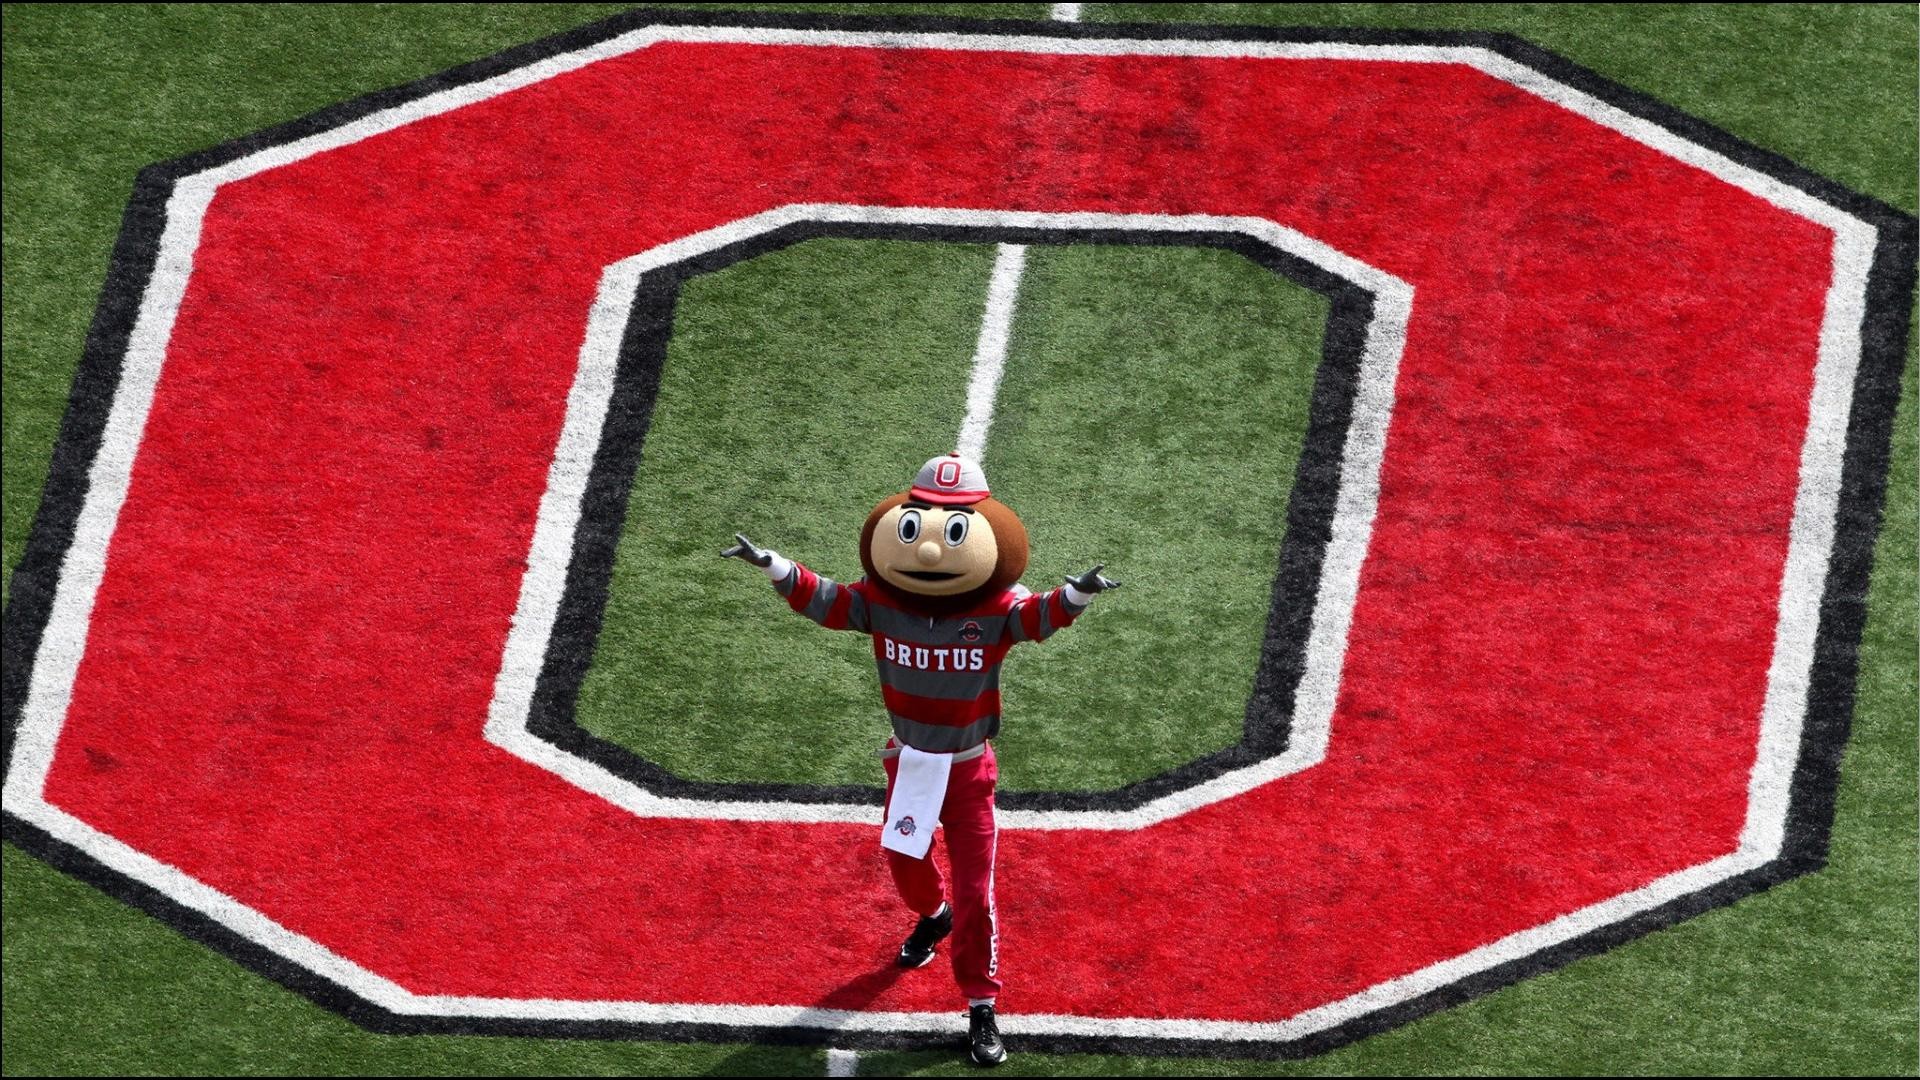 1920x1080 ohio state brutus wallpaper hd wallpapers high definition amazing cool desktop  wallpapers for windows tablet download free 1920Ã1080 Wallpaper HD